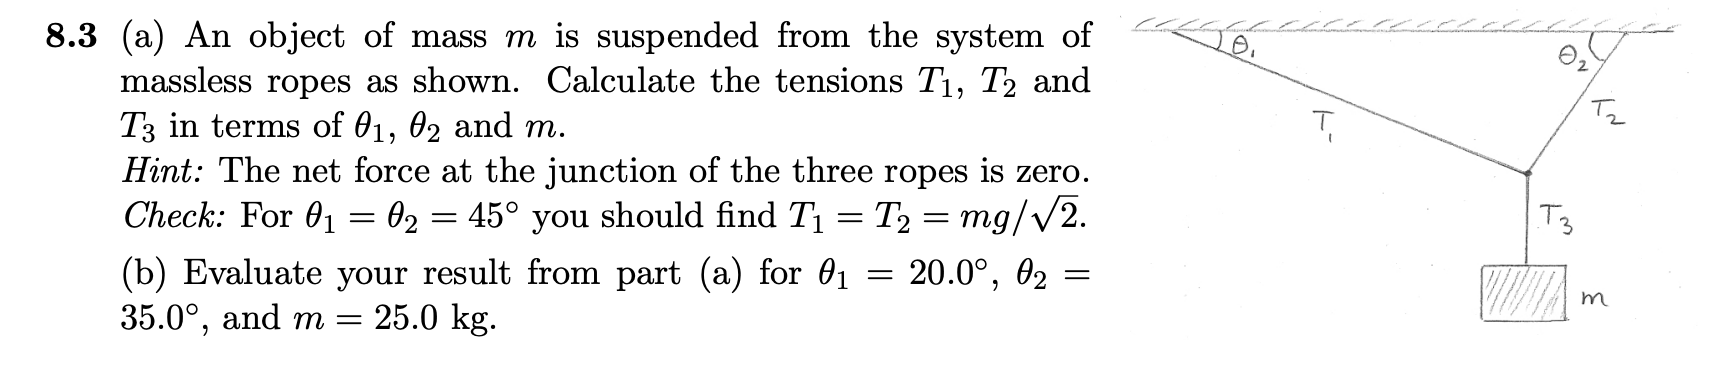 8.3 (a) An object of mass m is suspended from the system of
massless ropes as shown. Calculate the tensions T1, T2 and
T3 in terms of 01, 02 and m.
Hint: The net force at the junction of the three ropes is zero.
Check: For 01 = 02 = 45° you should find T1
Tz
= T2 = mg/v2.
20.0°,
02
(b) Evaluate your result from part (a) for 01
35.0°, and m =
25.0 kg.
